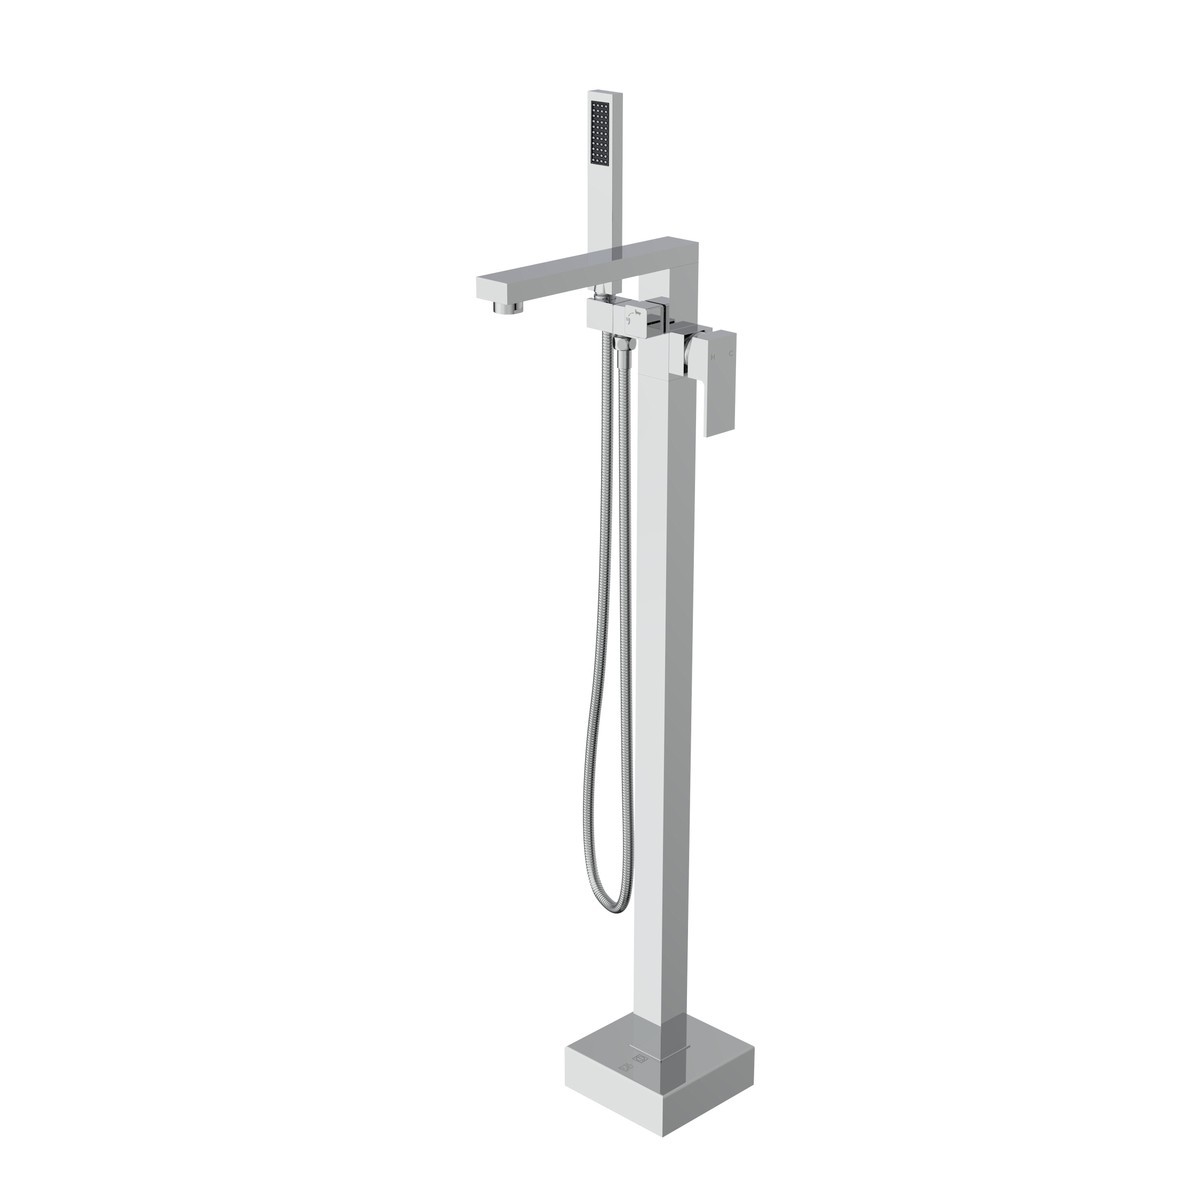 ELEGANT FURNITURE LIGHTING FAT-8002 HENRY 43 INCH FLOOR MOUNTED ROMAN TUB FAUCET WITH HAND SHOWER